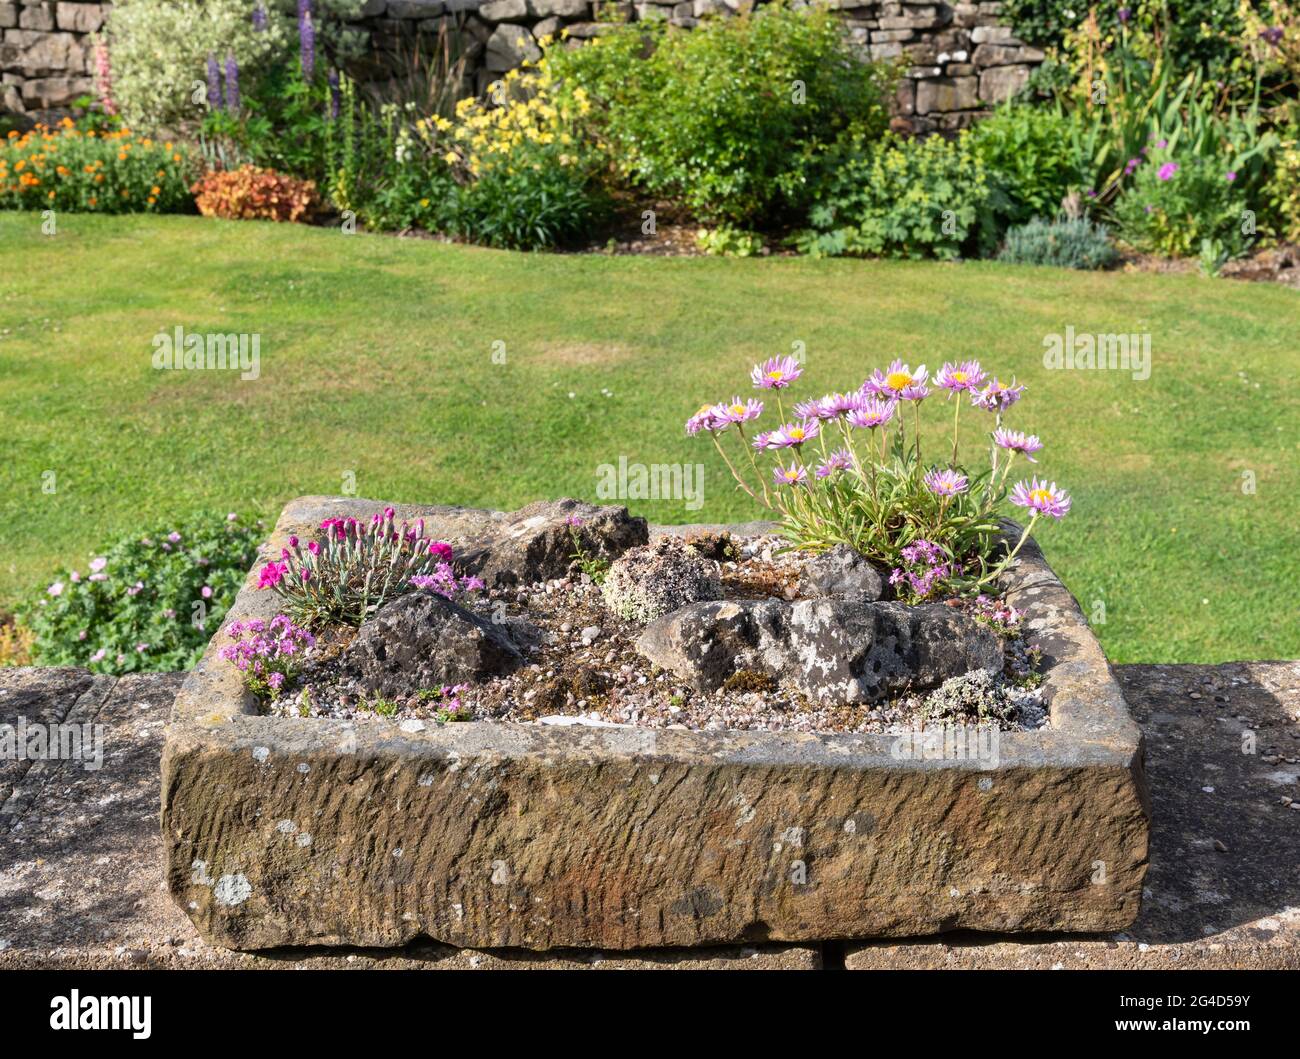 A planted stone sink in a garden Stock Photo